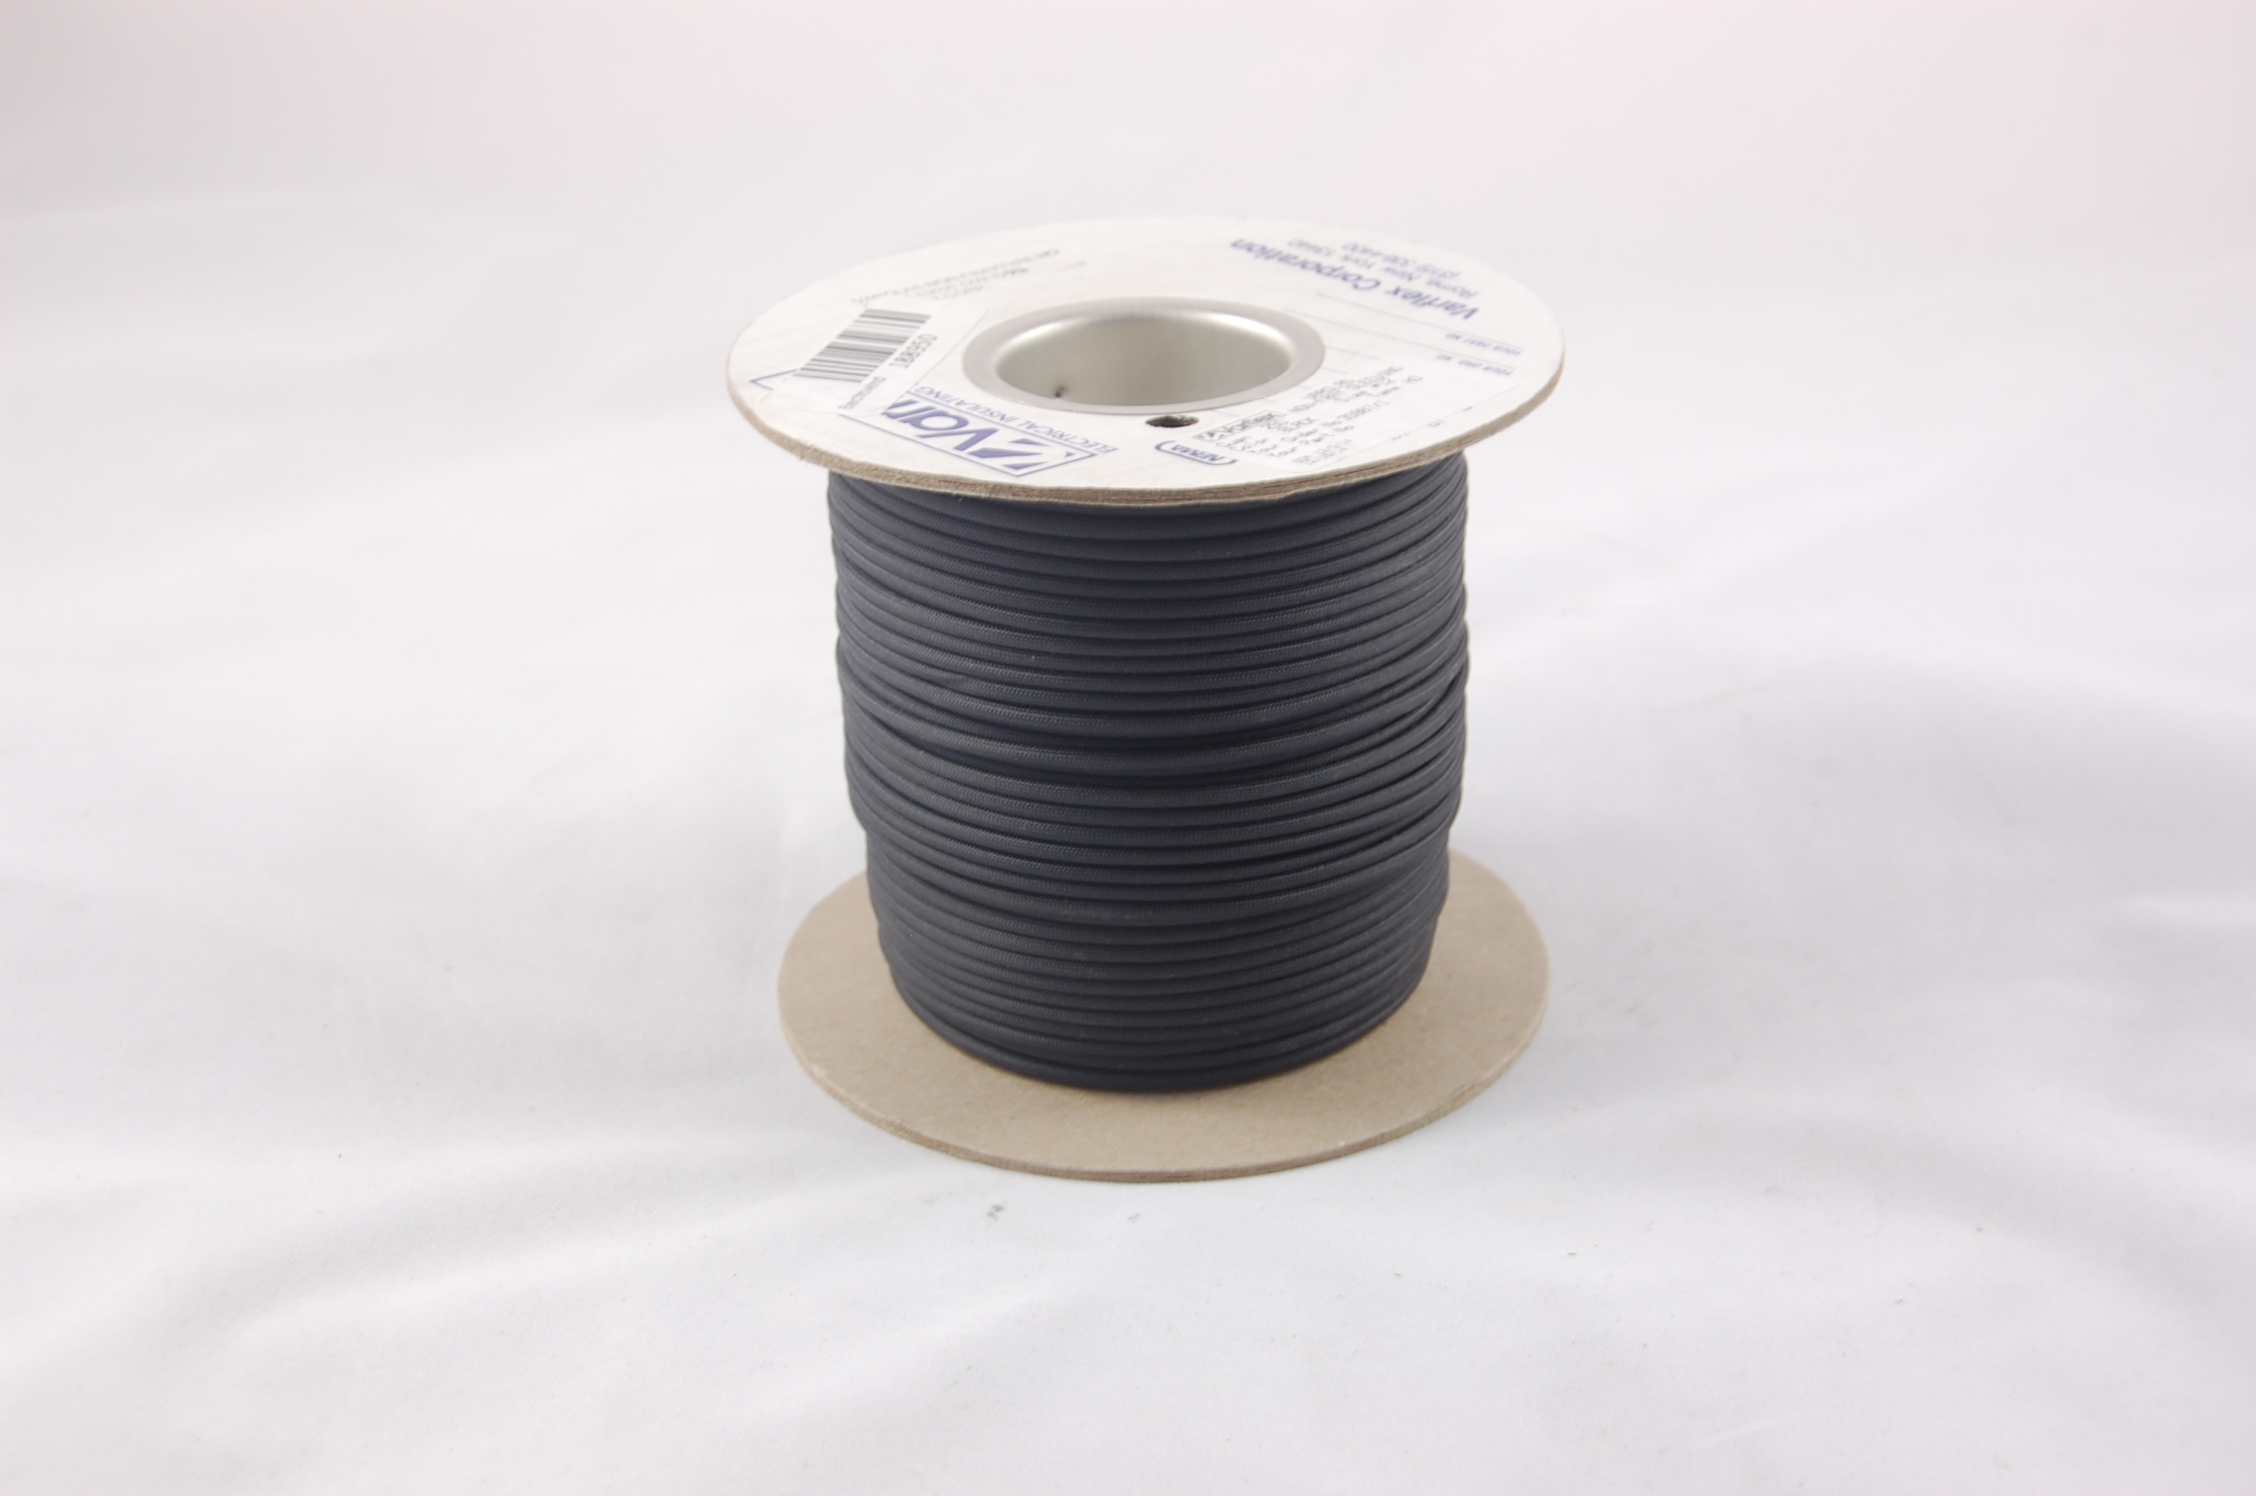 3/4" AWG Varglas Type HO Heat-Cleaned and Treated High Temperature Non-Fray Flexible Fiberglass Sleeving , black, 100 FT per spool